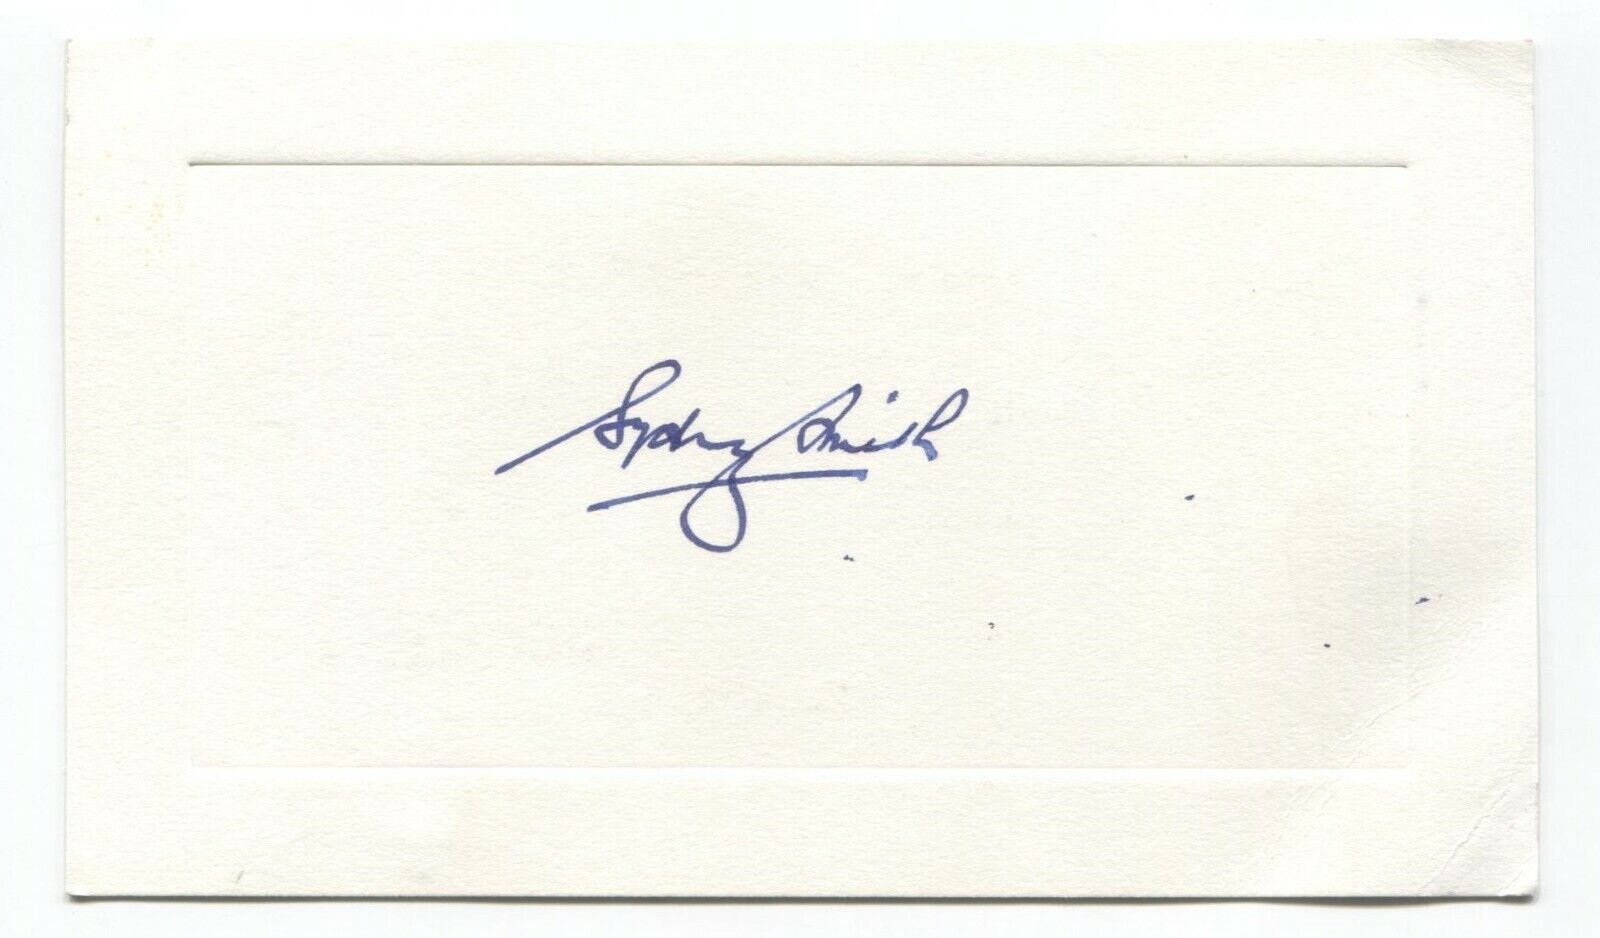 Sir Sydney Smith Signed Card Autographed Signature Forensic Expert Scientist